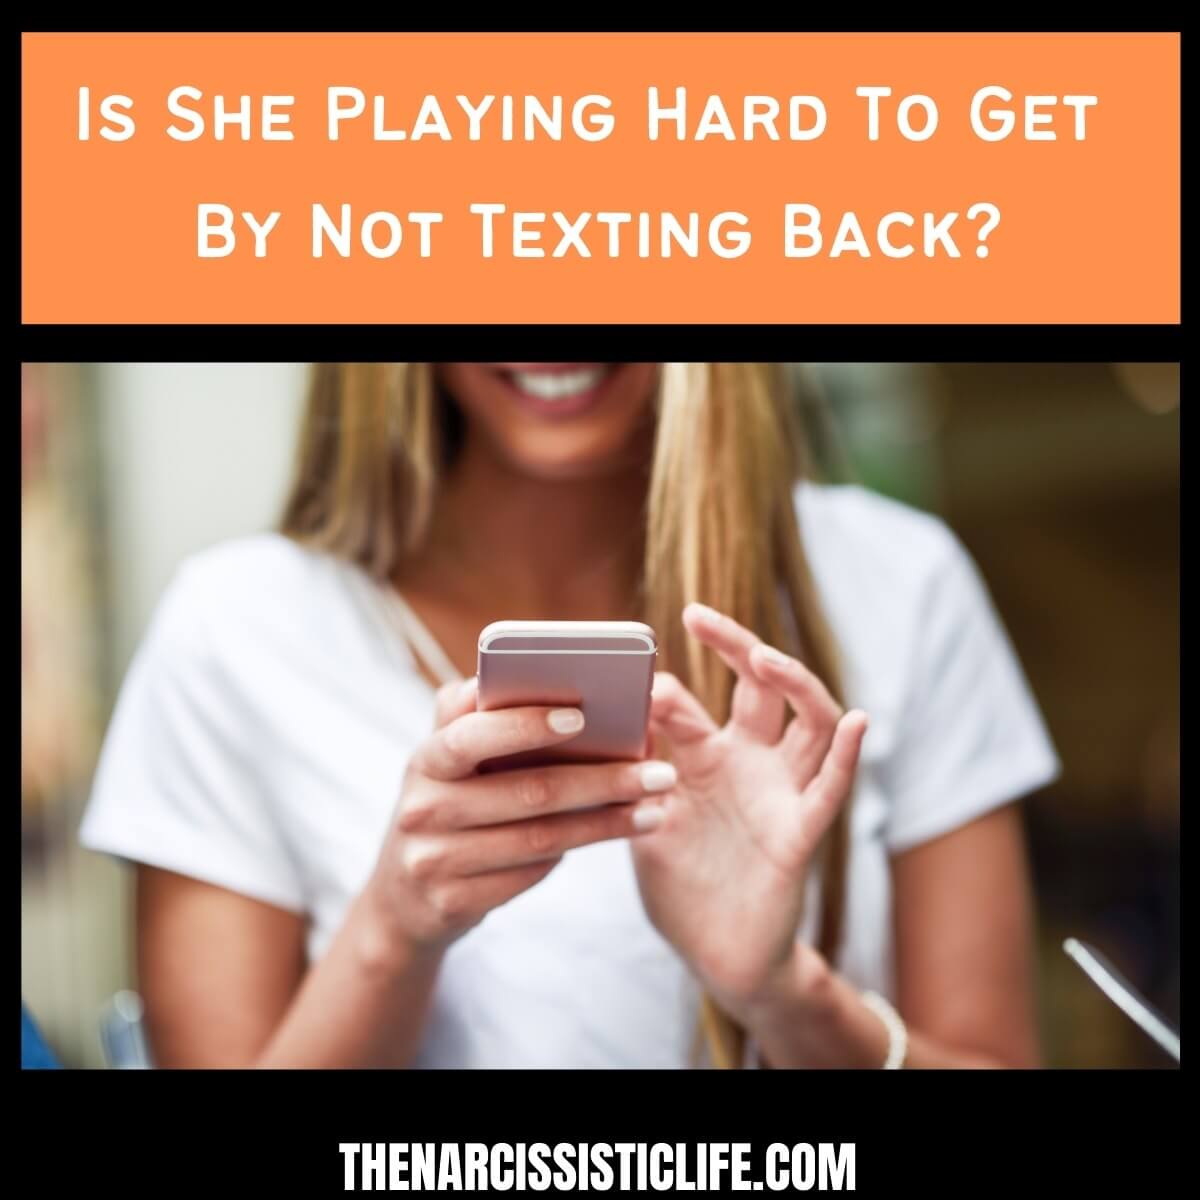 Is She Playing Hard To Get By Not Texting Back?